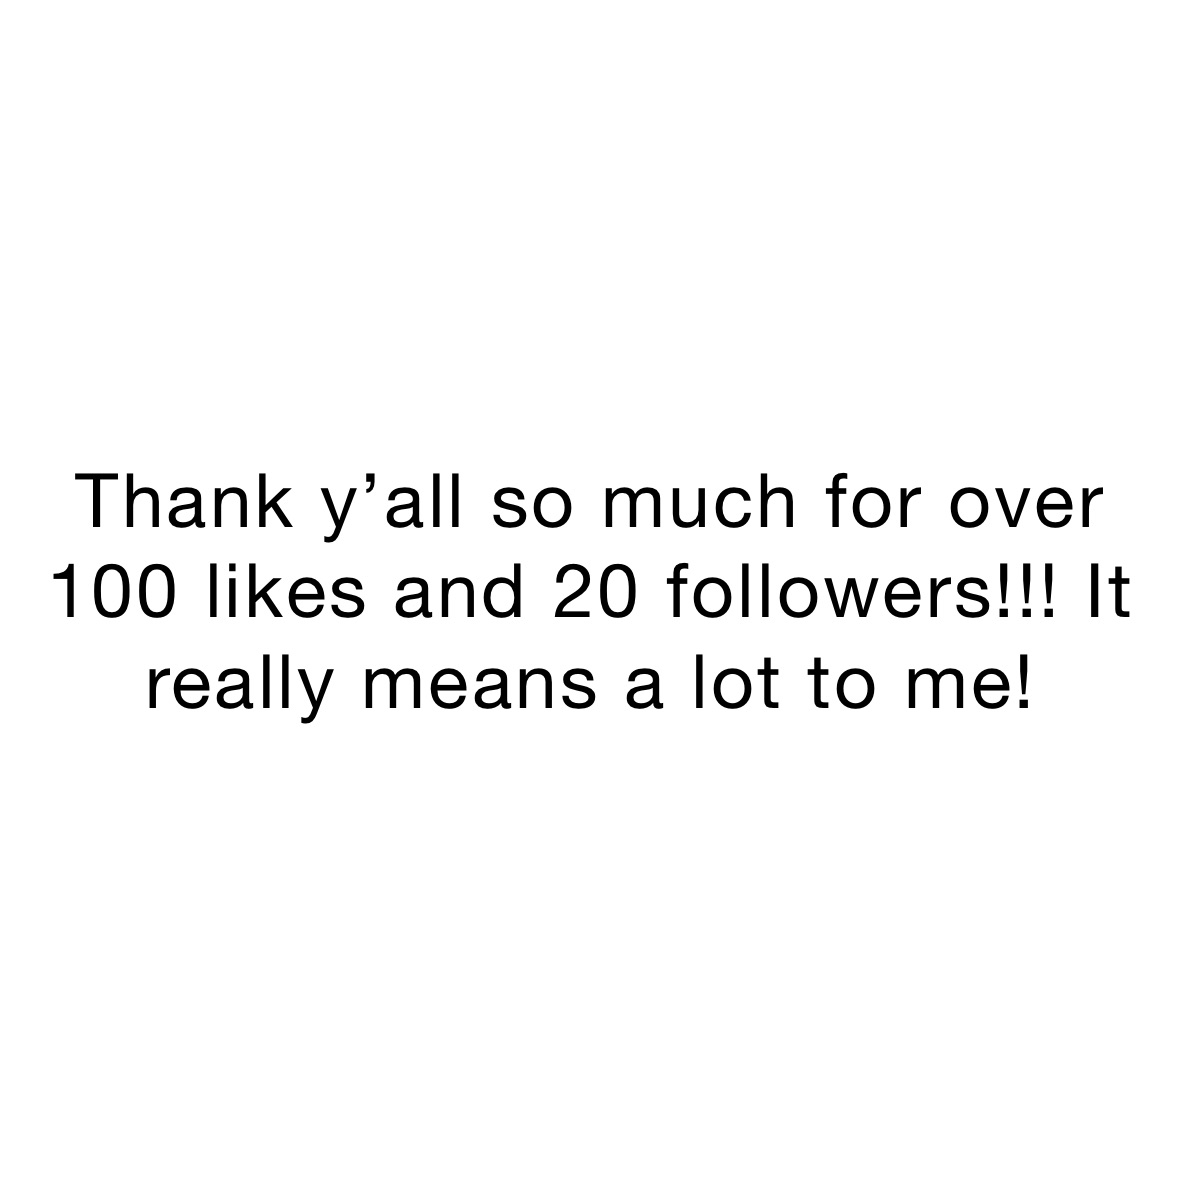 Thank y’all so much for over 100 likes and 20 followers!!! It really means a lot to me!